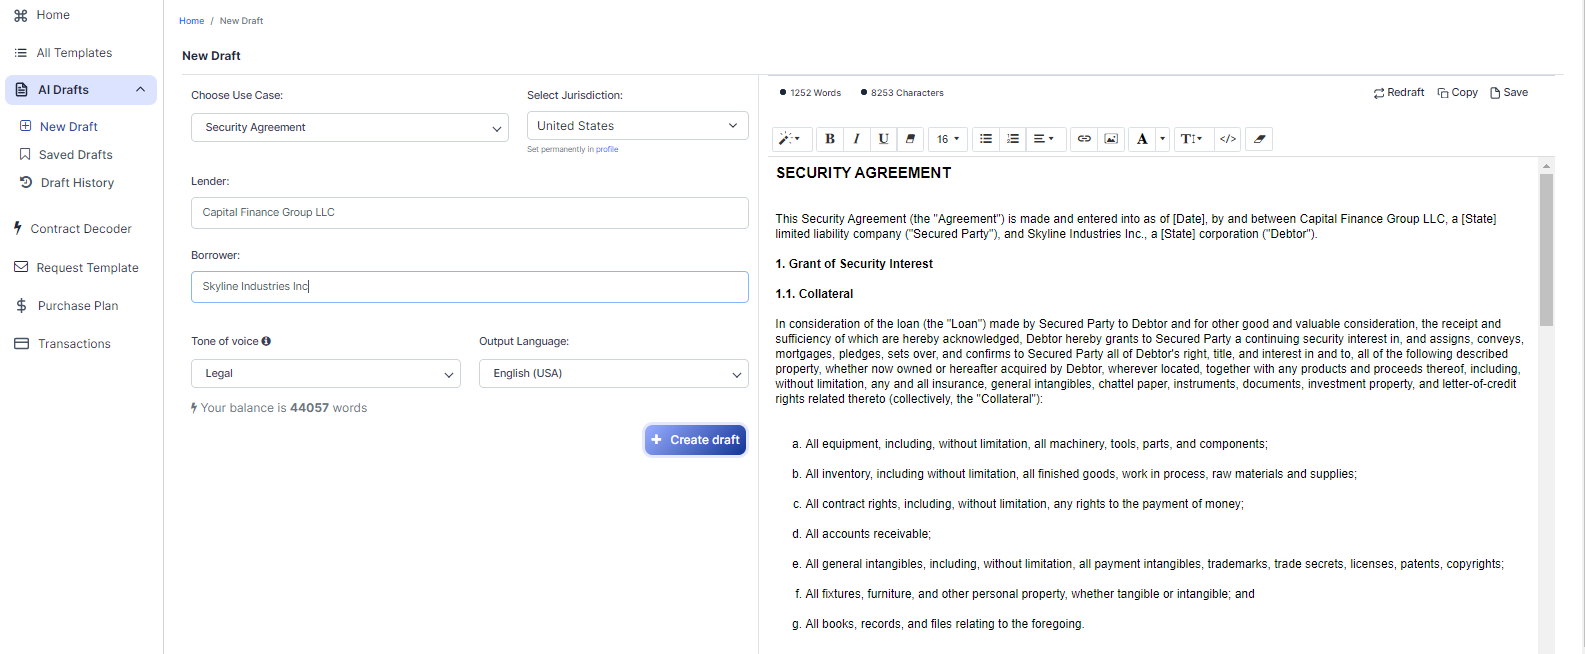 Security Agreement template